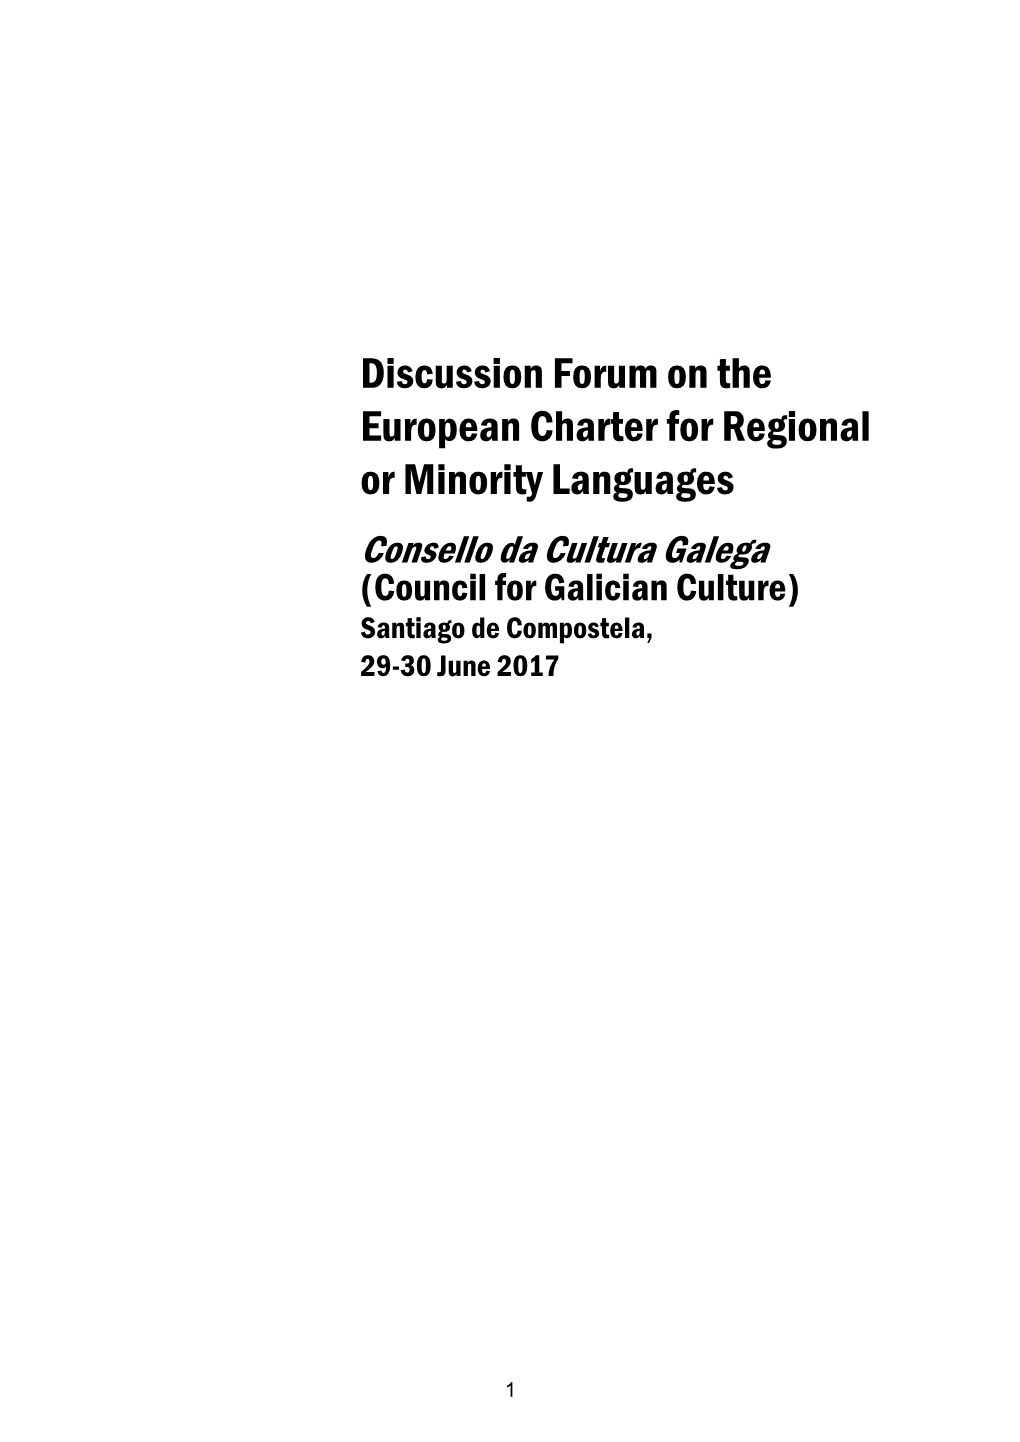 Discussion Forum on the European Charter for Regional Or Minority